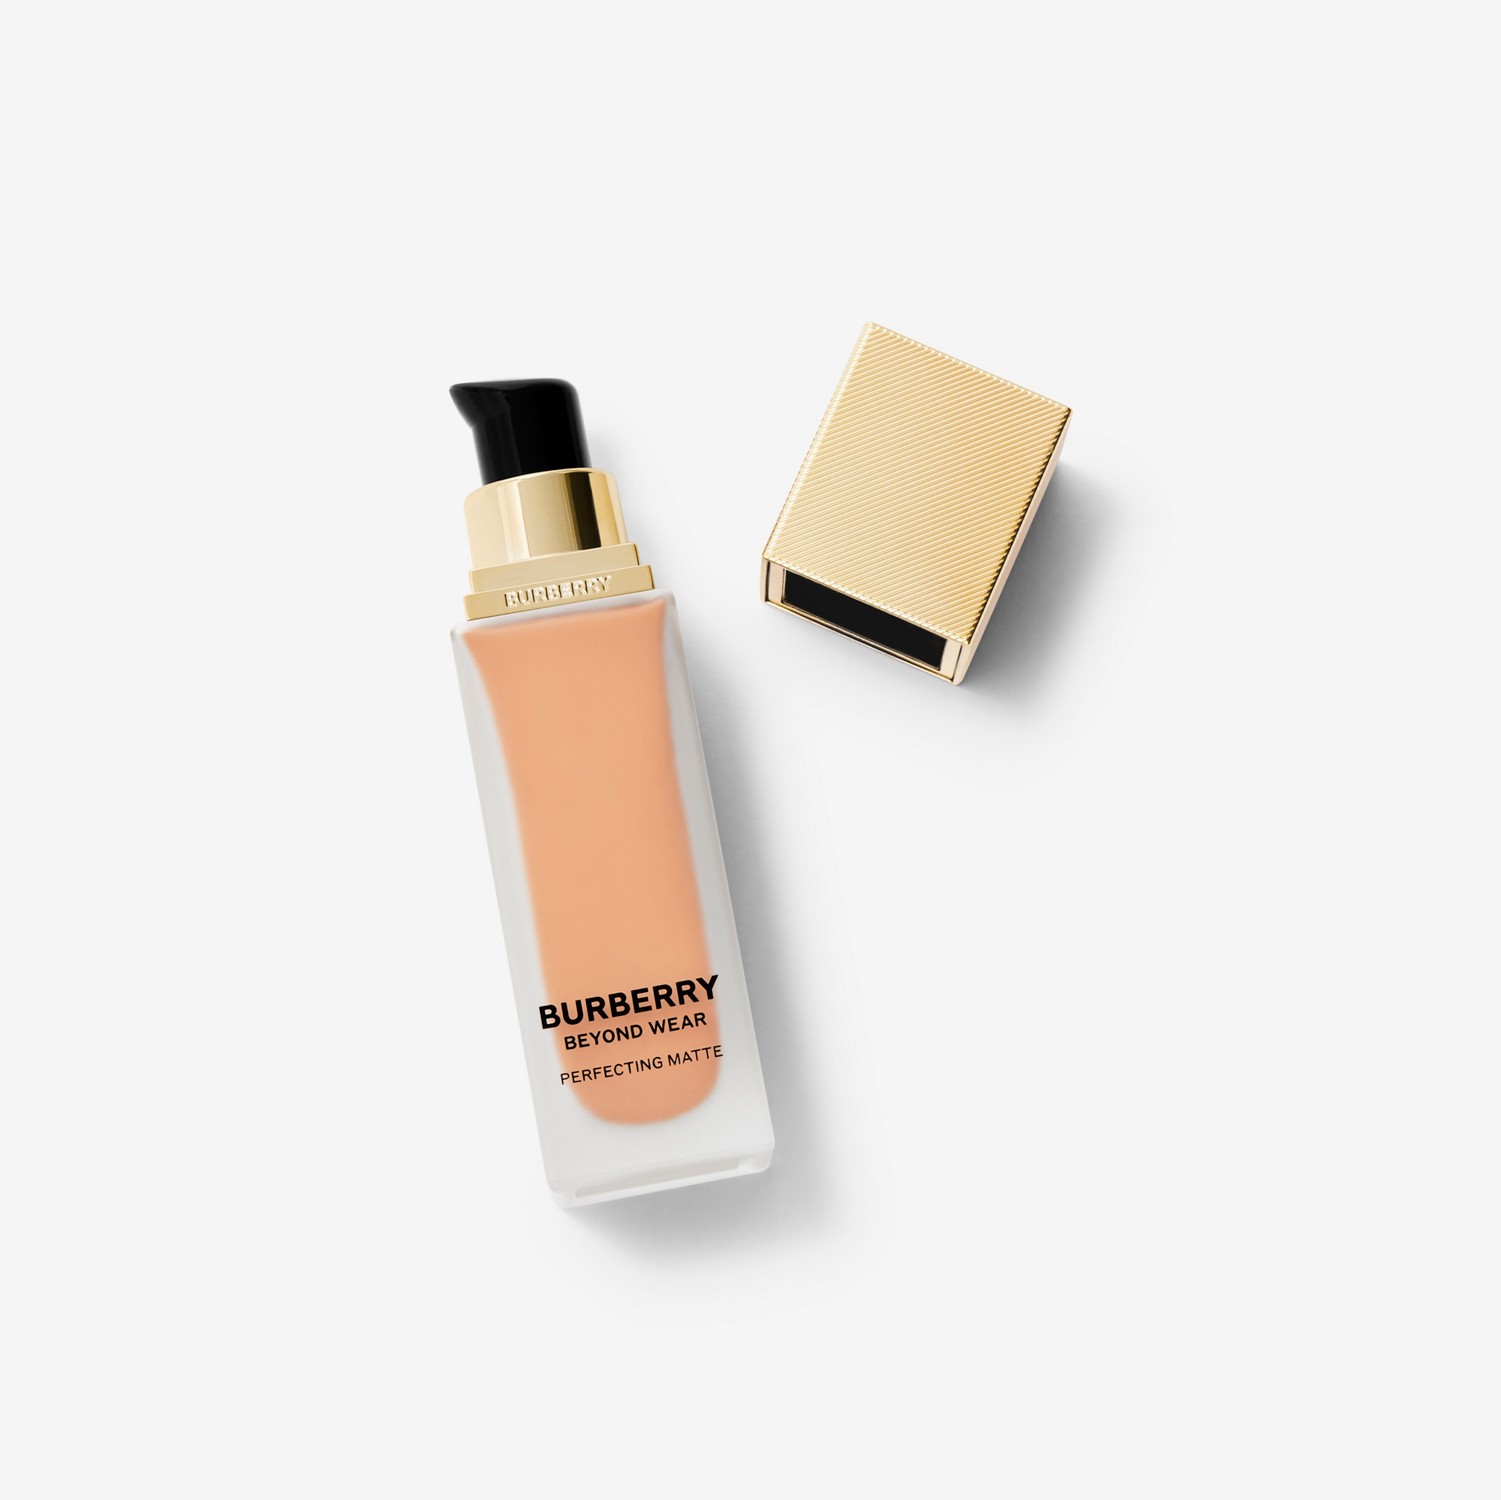 Beyond Wear Perfecting Matte Foundation – 45 Light Neutral - Mulheres | Burberry® oficial